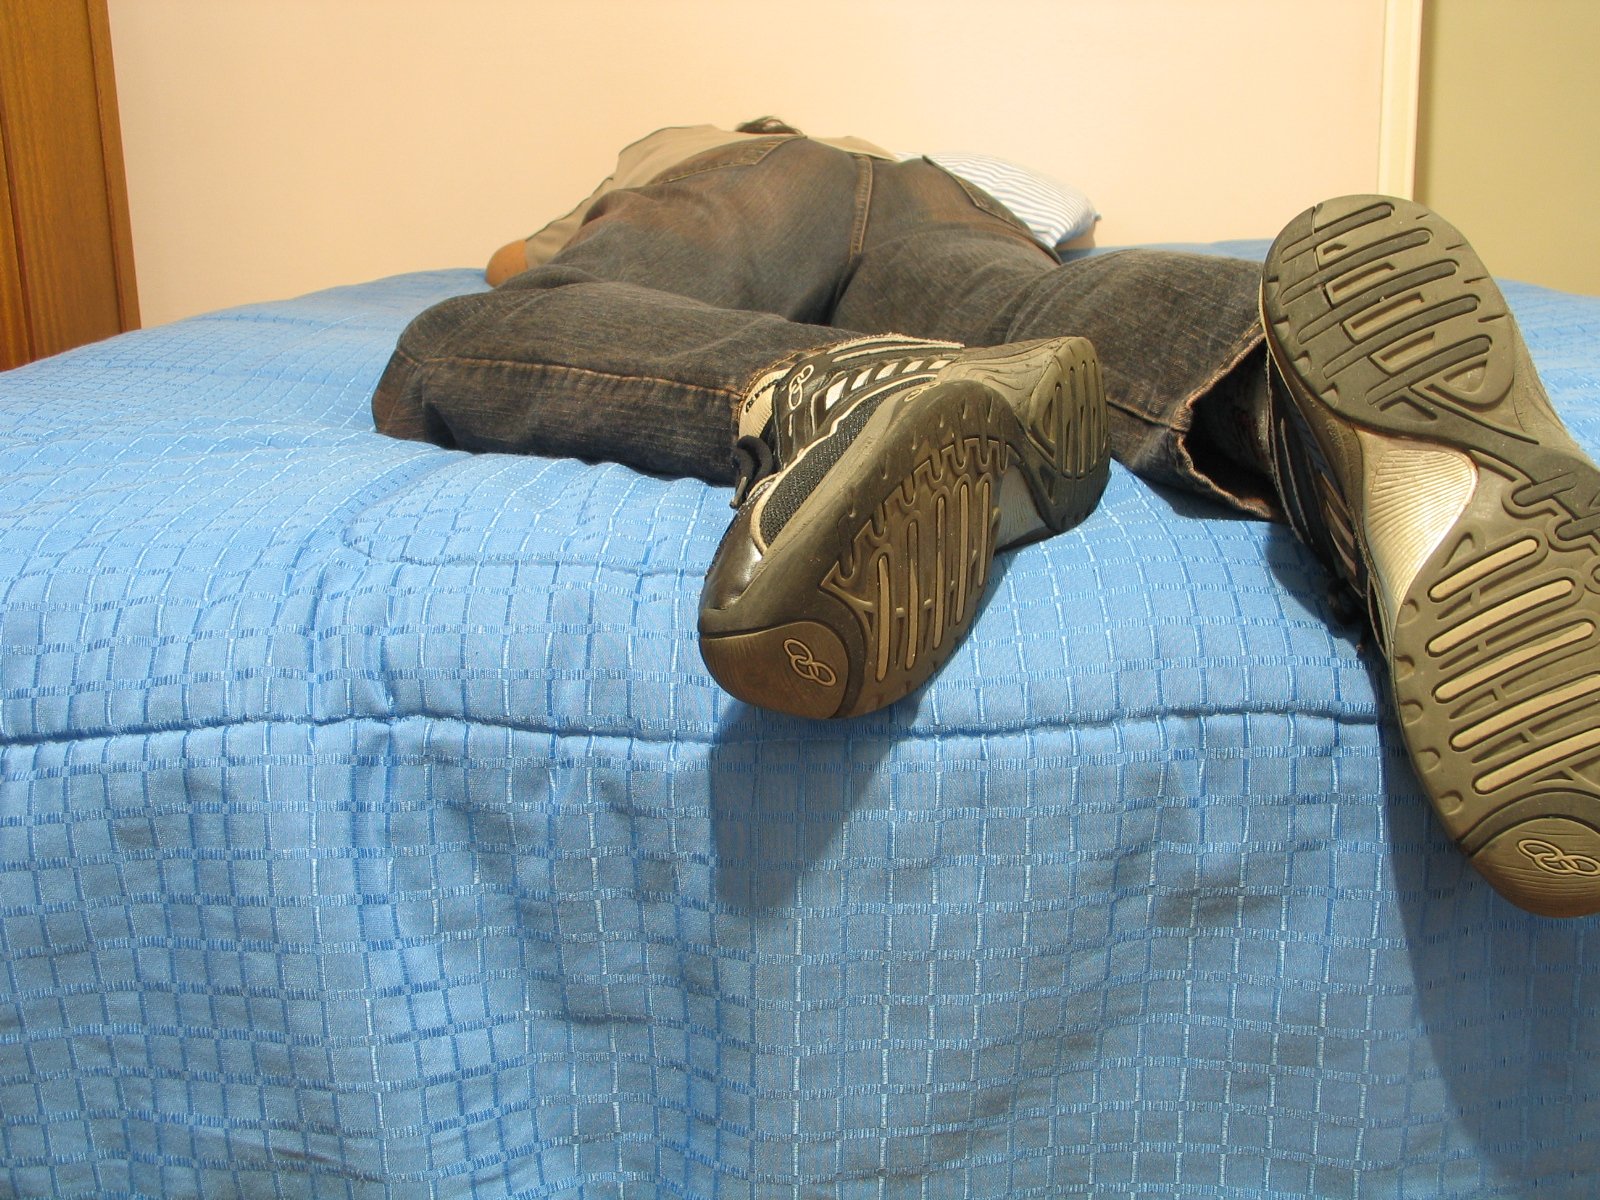 two pairs of feet resting on top of the bed